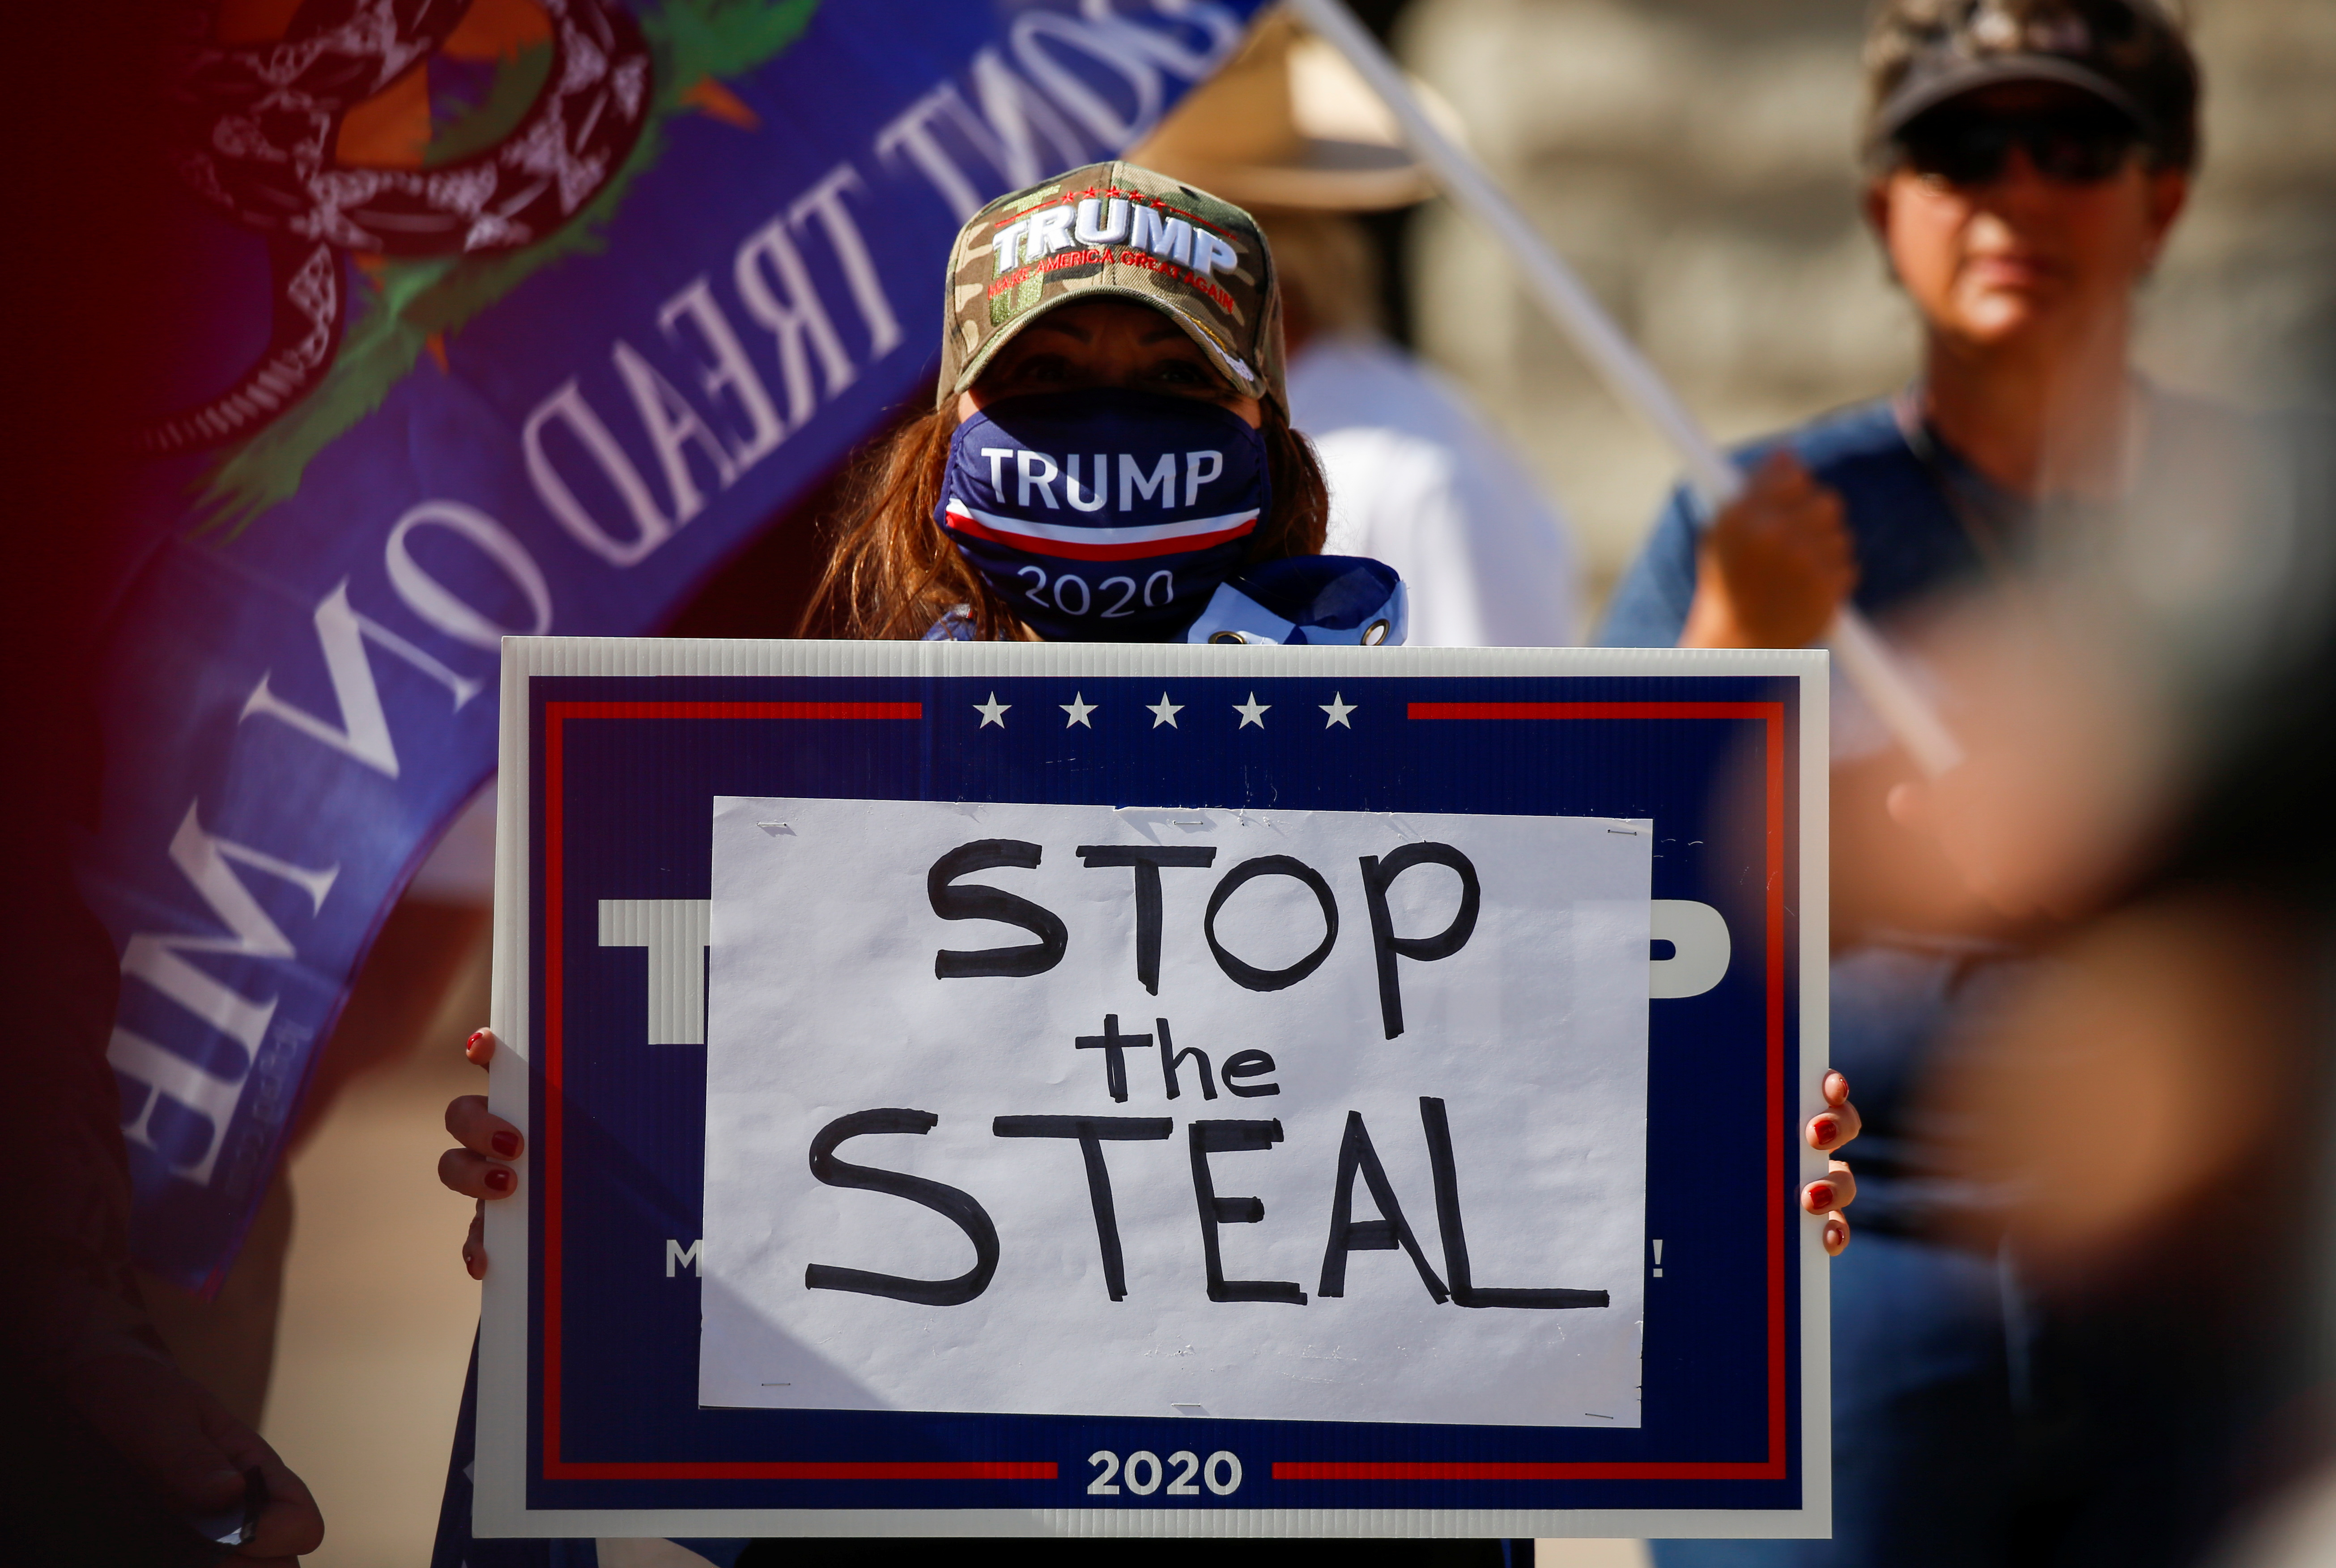 Supporters of U.S. President Donald Trump gather at a "Stop the Steal" protest after the 2020 U.S. presidential election was called by the media for Democratic candidate Joe Biden, in Phoenix